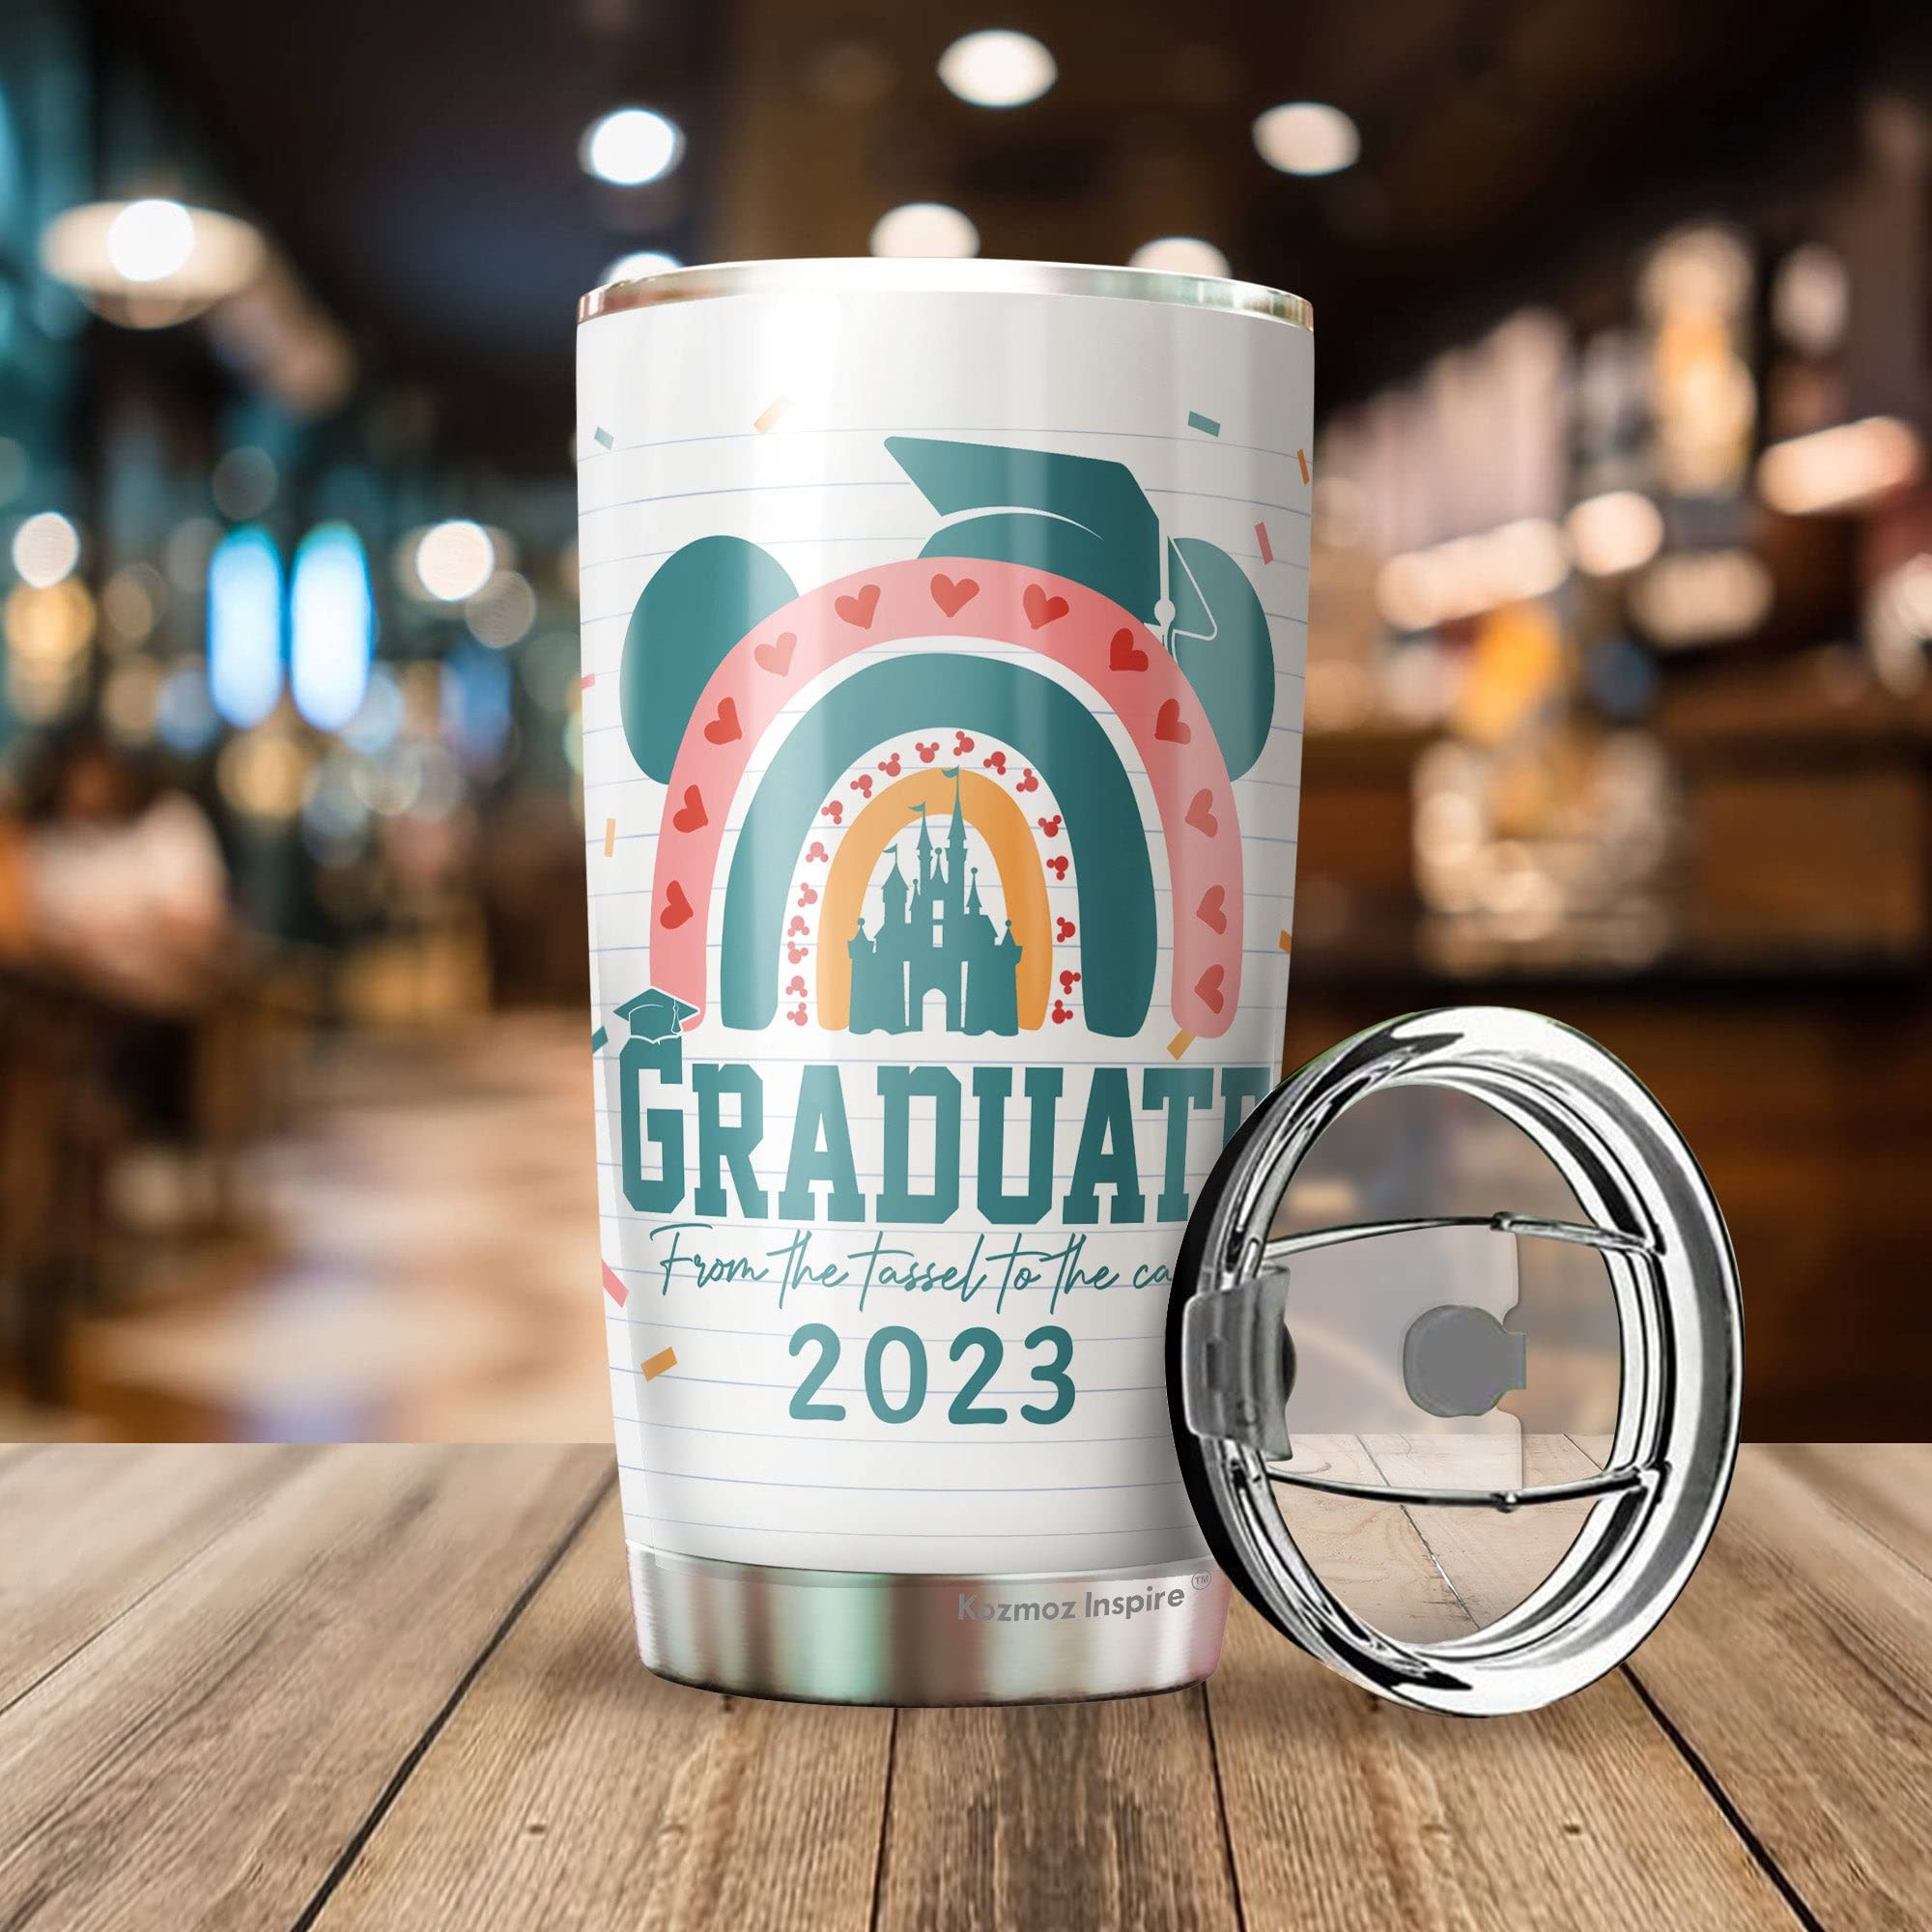 Graduation Gifts - Graduation Decorations - Perfect Gifts For Graduates - From The Tassel To The Castle Mug - Meaning Gift 2023 For College High School Masters Degree Friend Daughter Son Tumbler 20oz